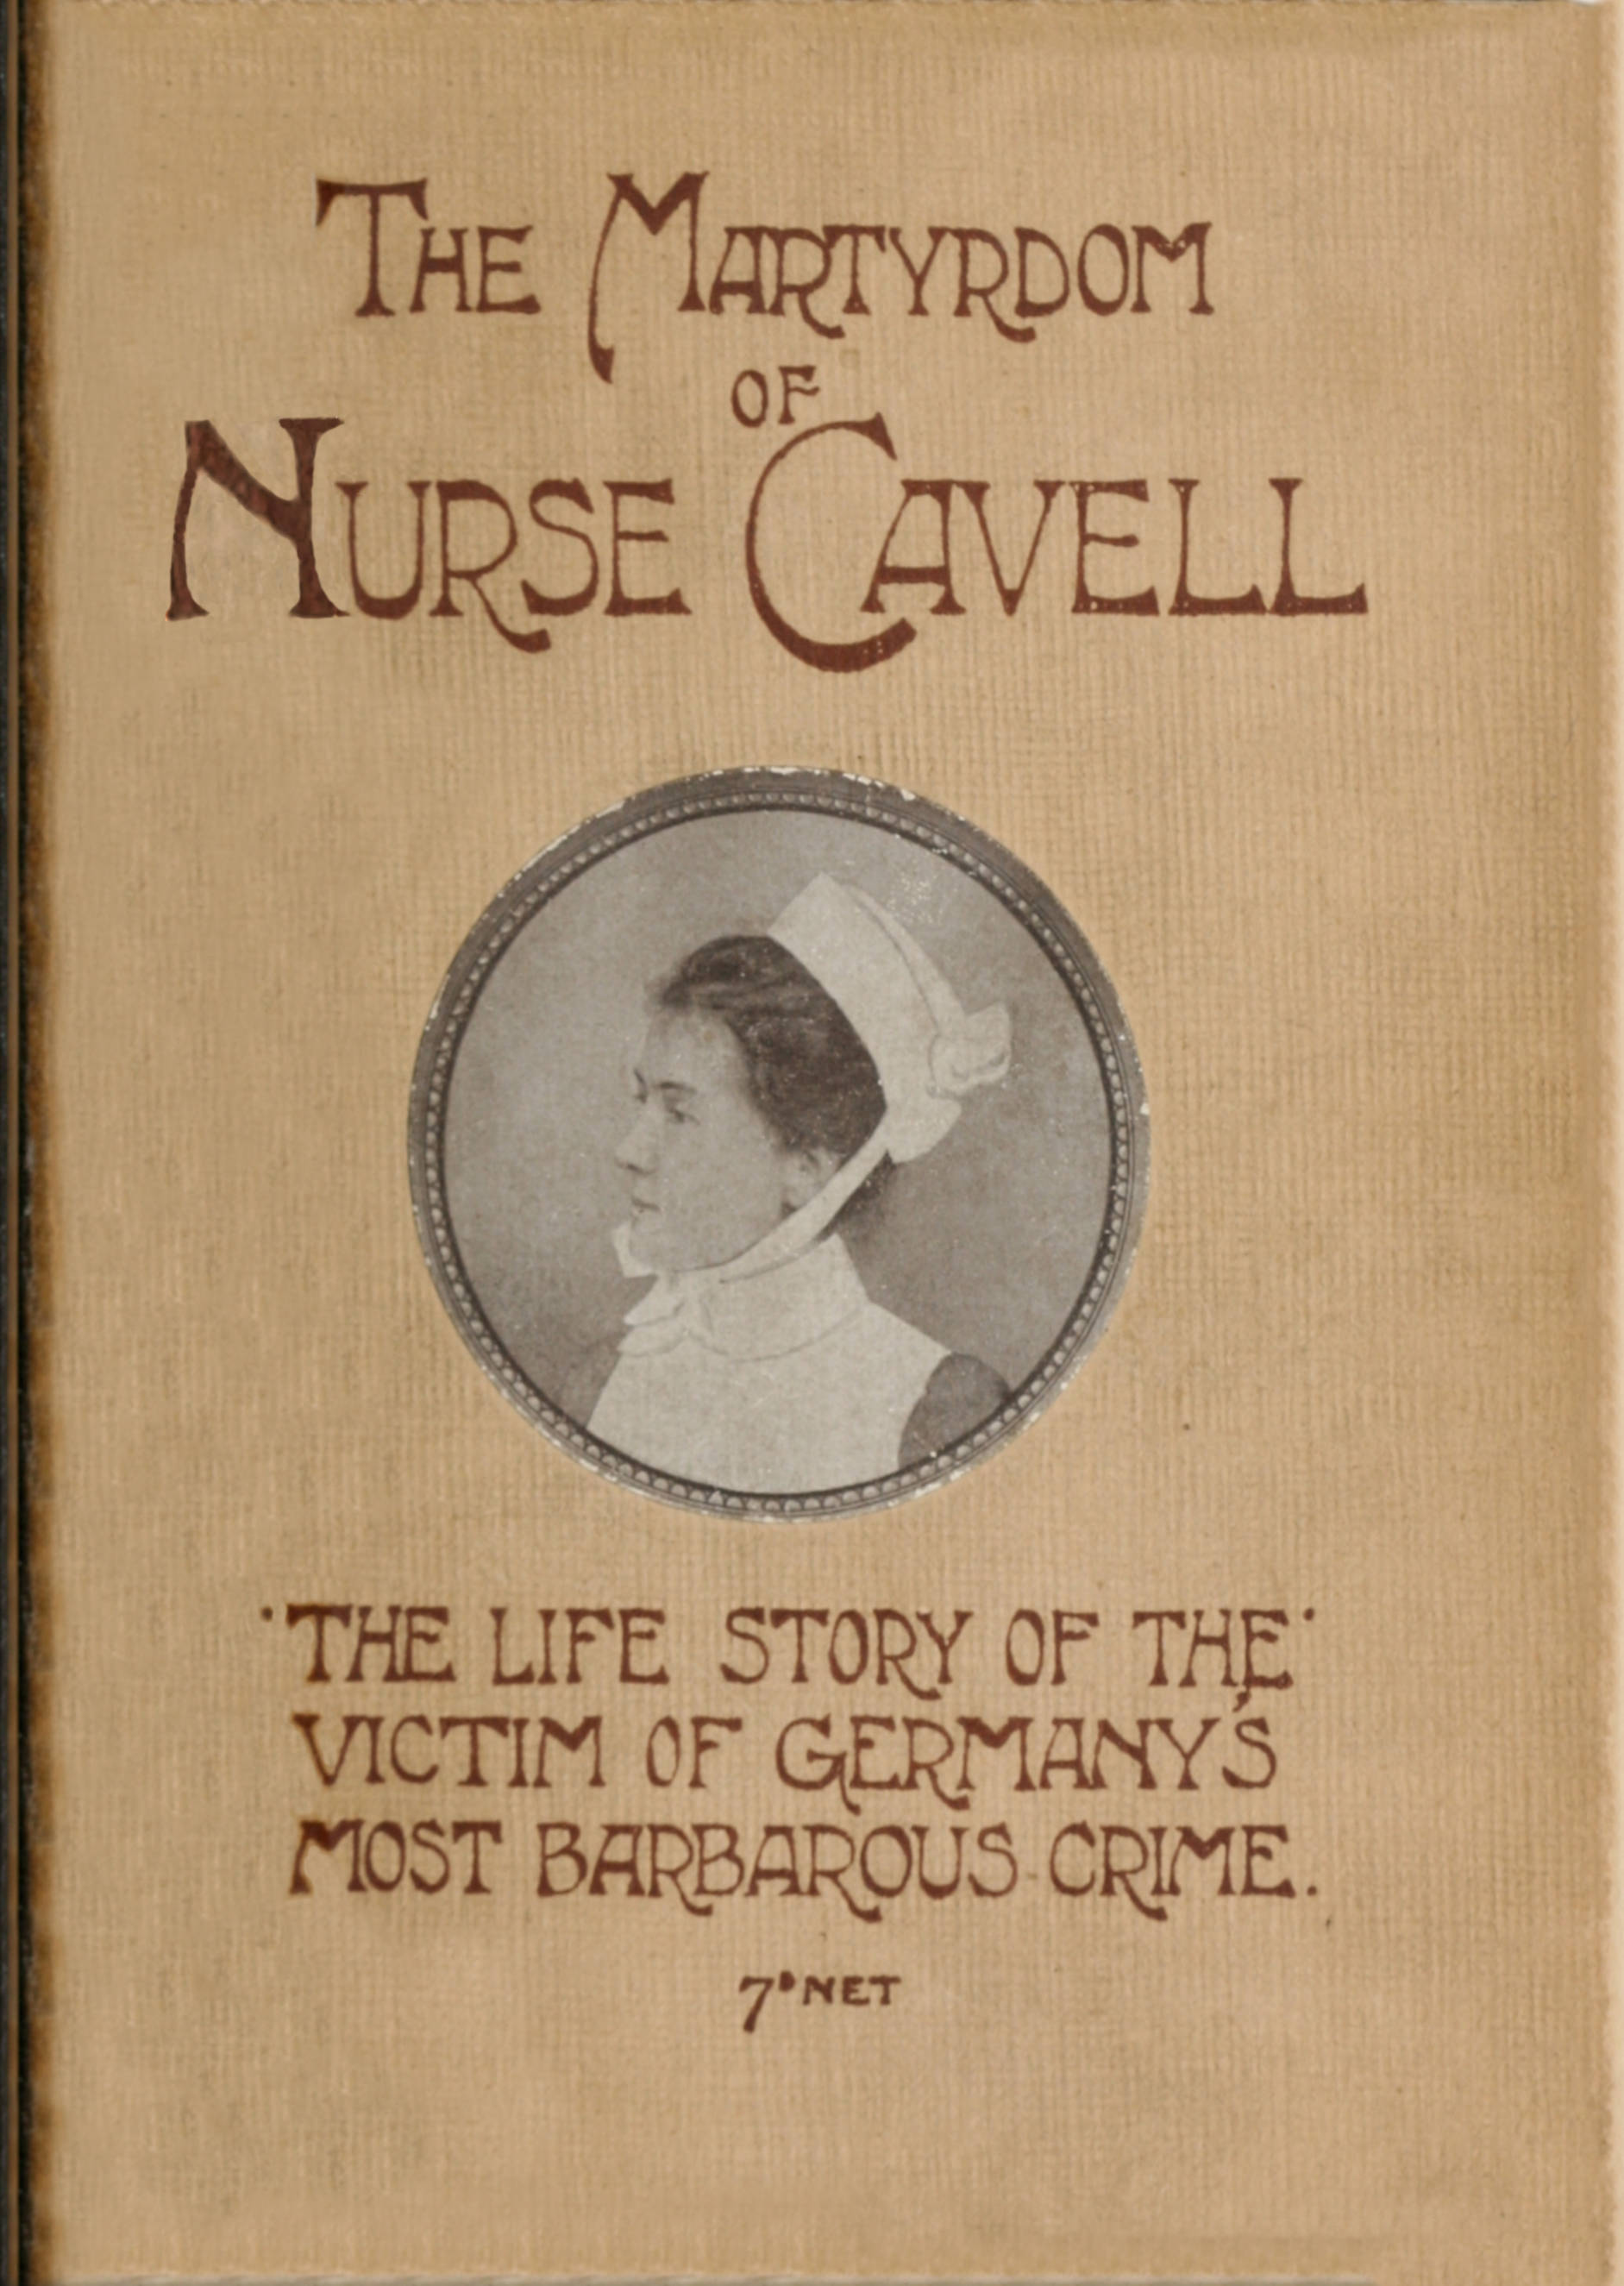 The martyrdom of Nurse Cavell&#10;The life story of the victim of Germany's most barbarous crime